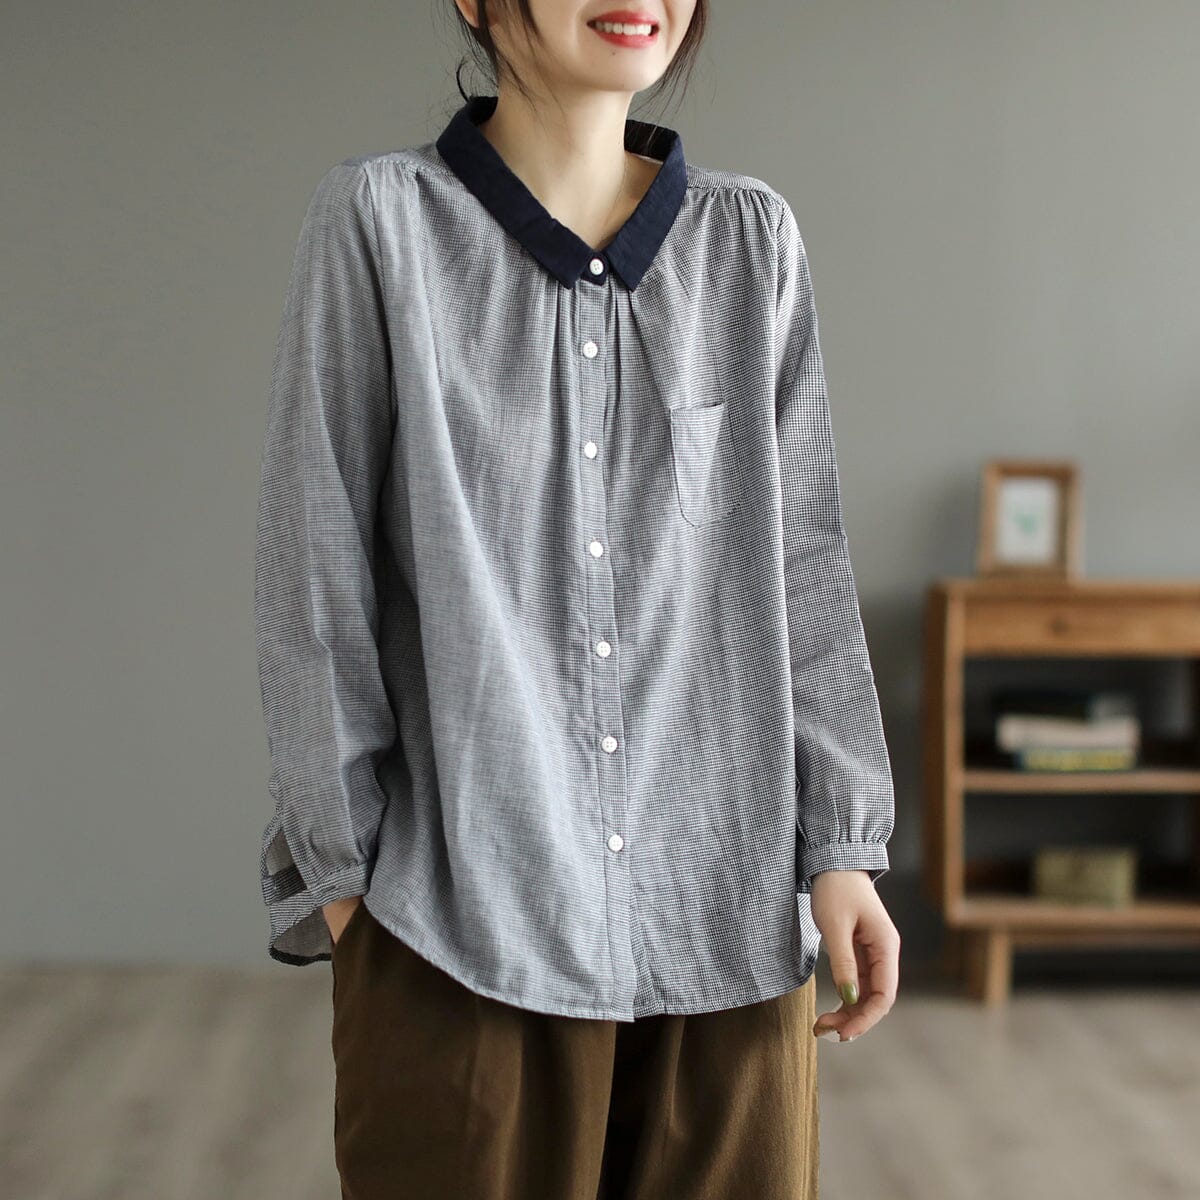 Spring Casual Plaid Double-Layer Cotton Blouse Feb 2023 New Arrival One Size 2 